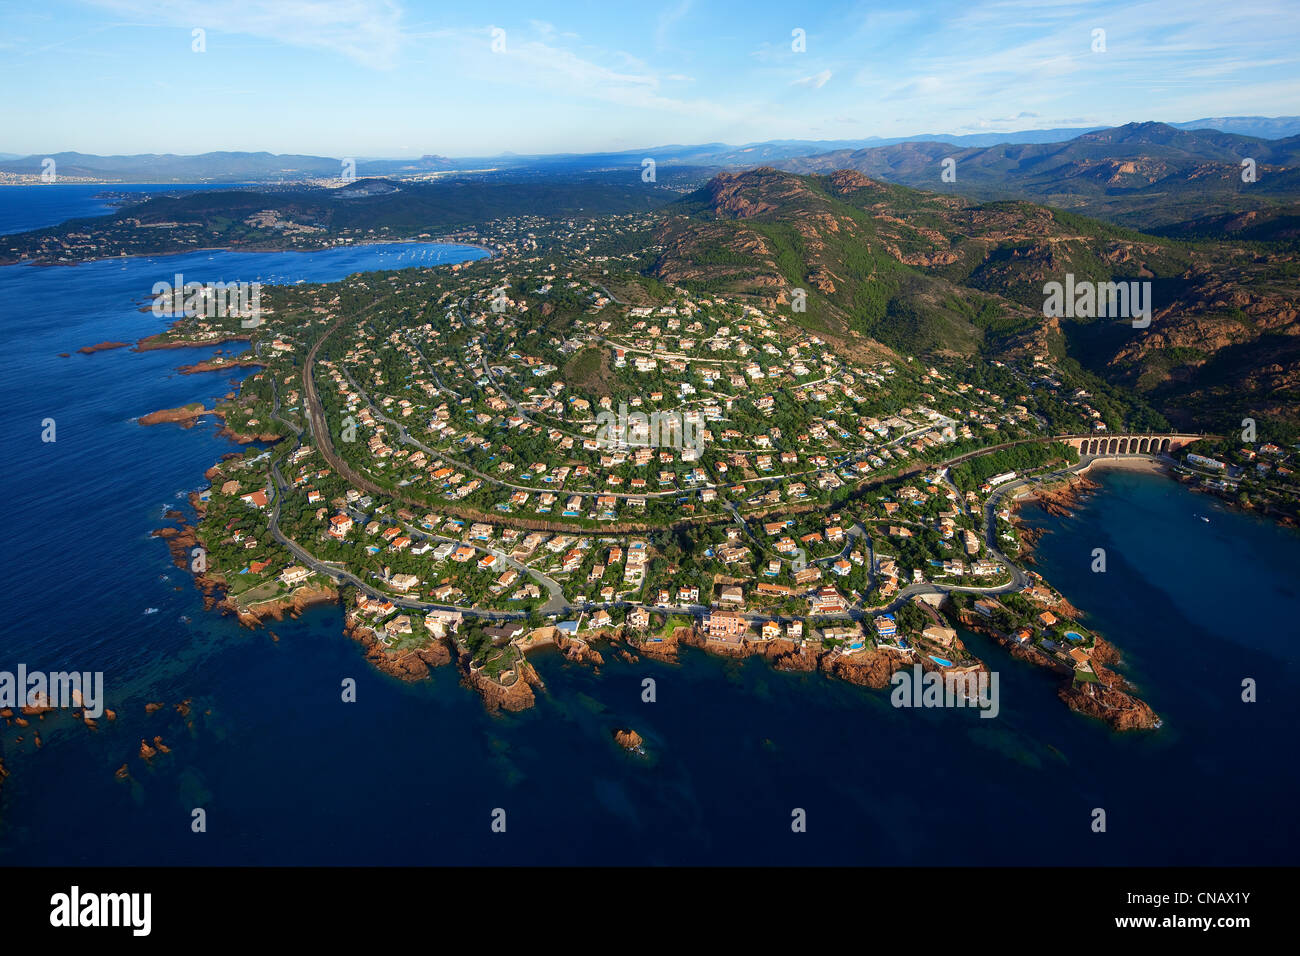 France, Var, Esterel, Saint Raphael, antheor, antheor inlet of the Rade d'Agay in the background (aerial view) Stock Photo